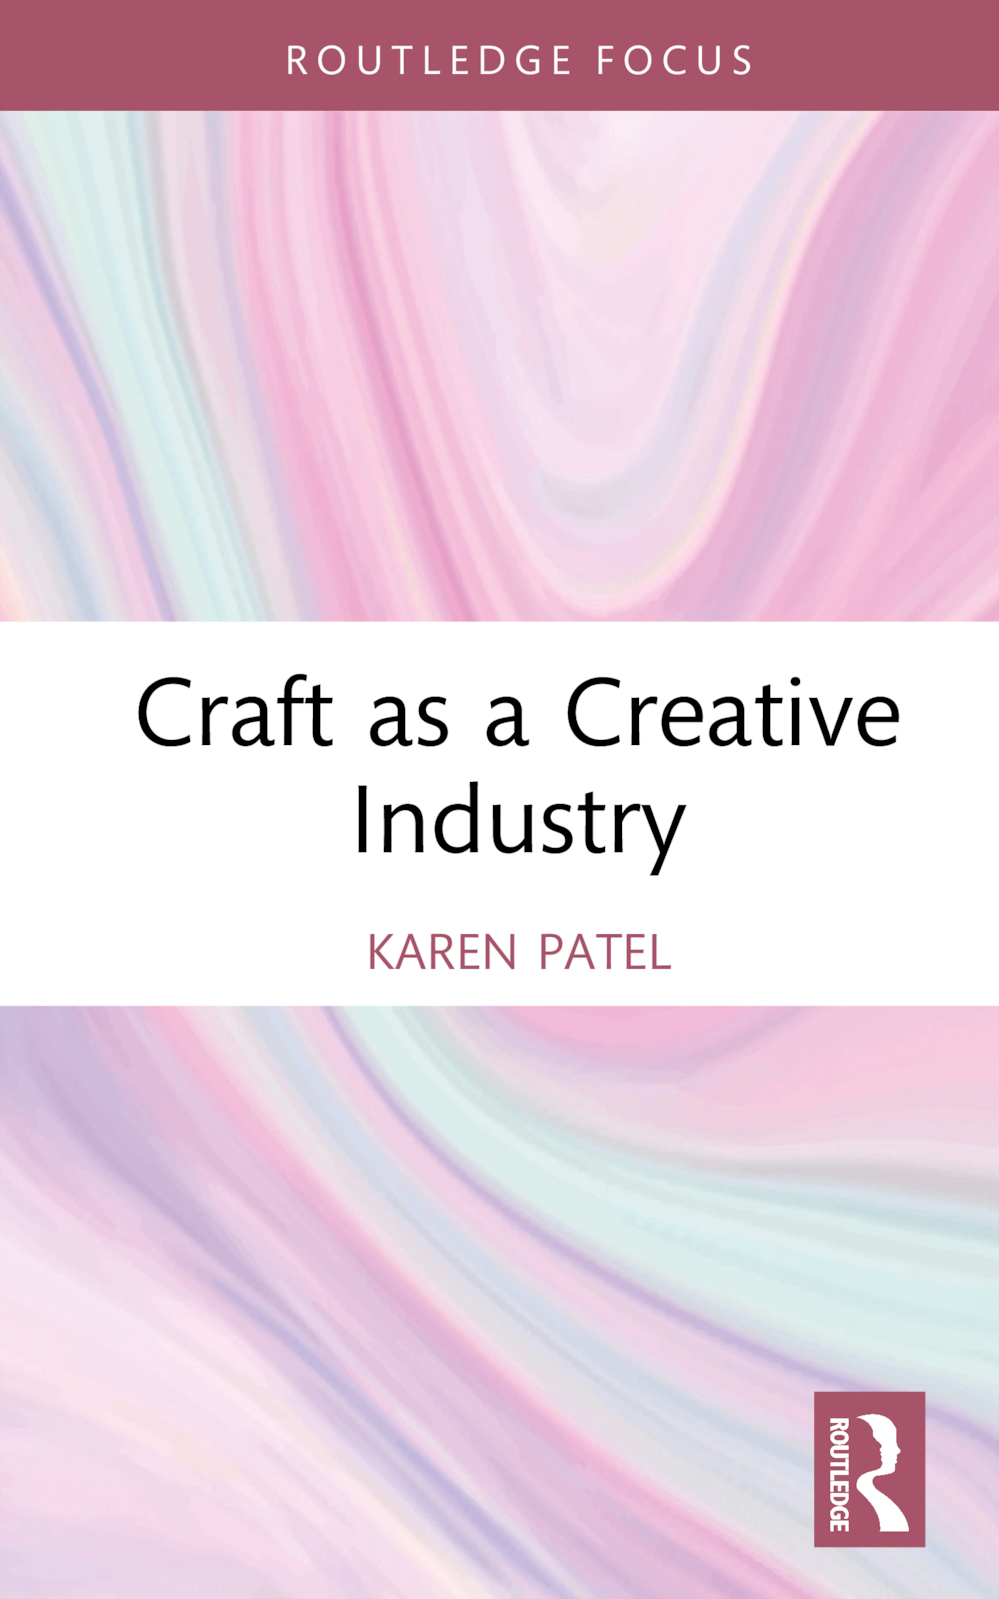 Craft as a Creative Industry book launch